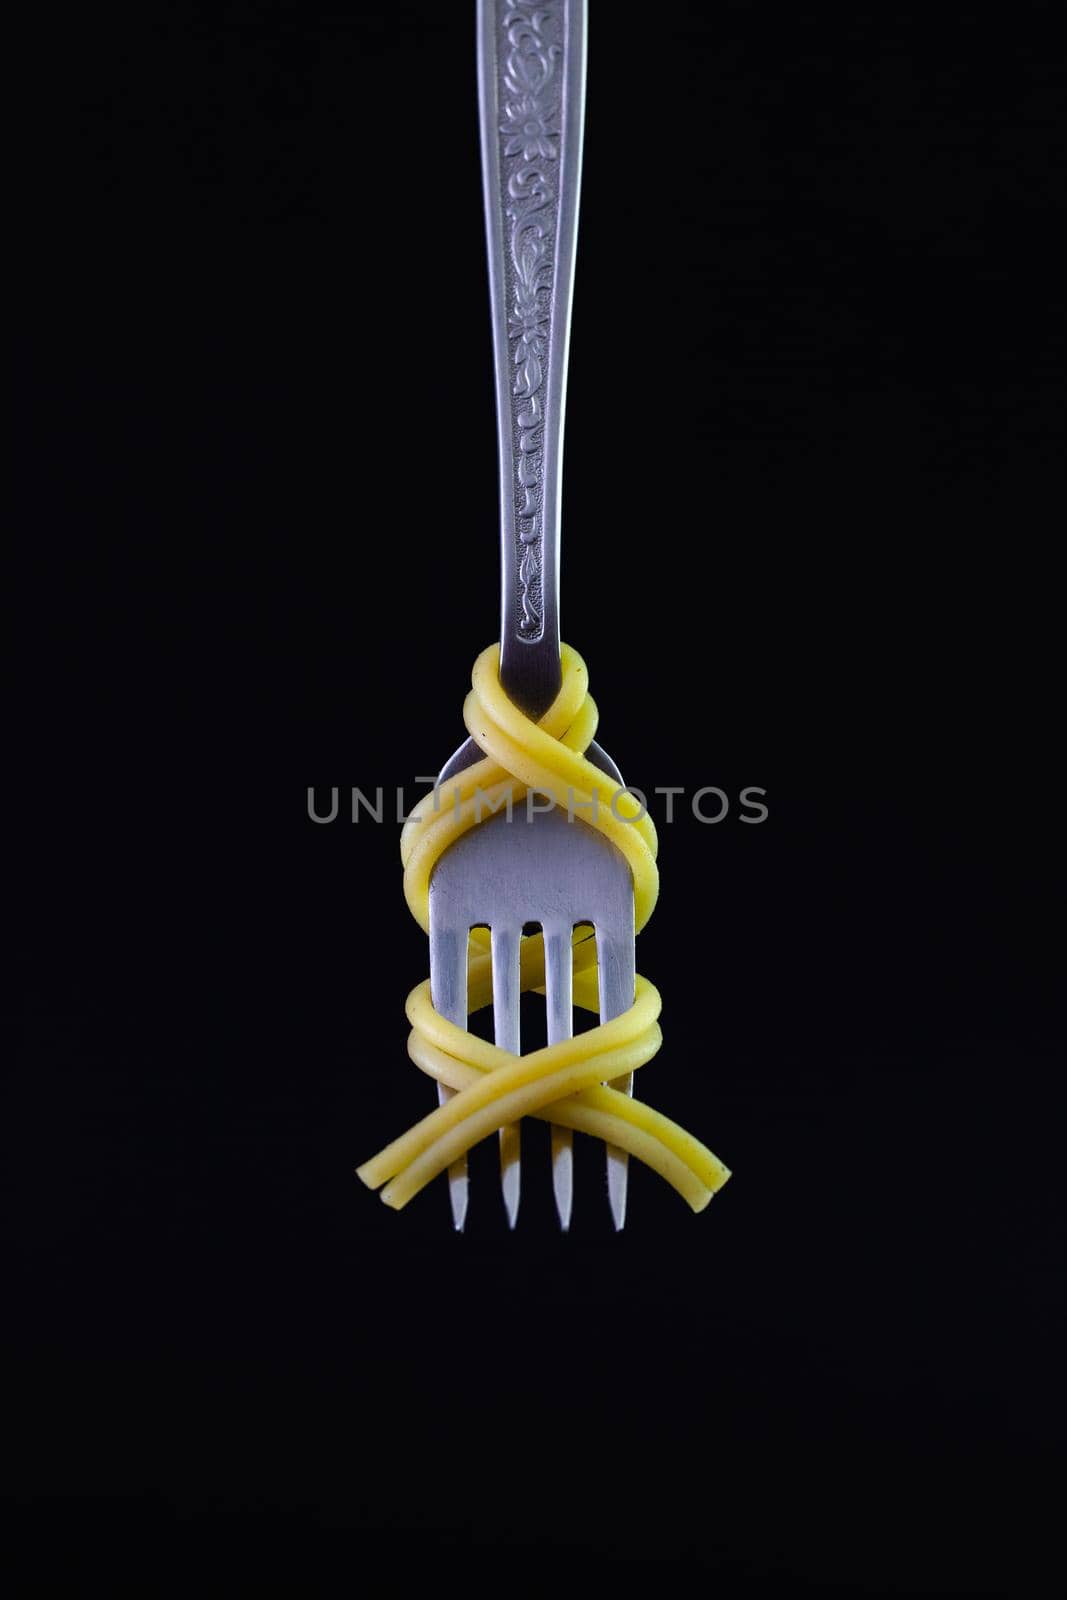 Freshly cooked pasta on a old fork on the black background.  by CaptureLight